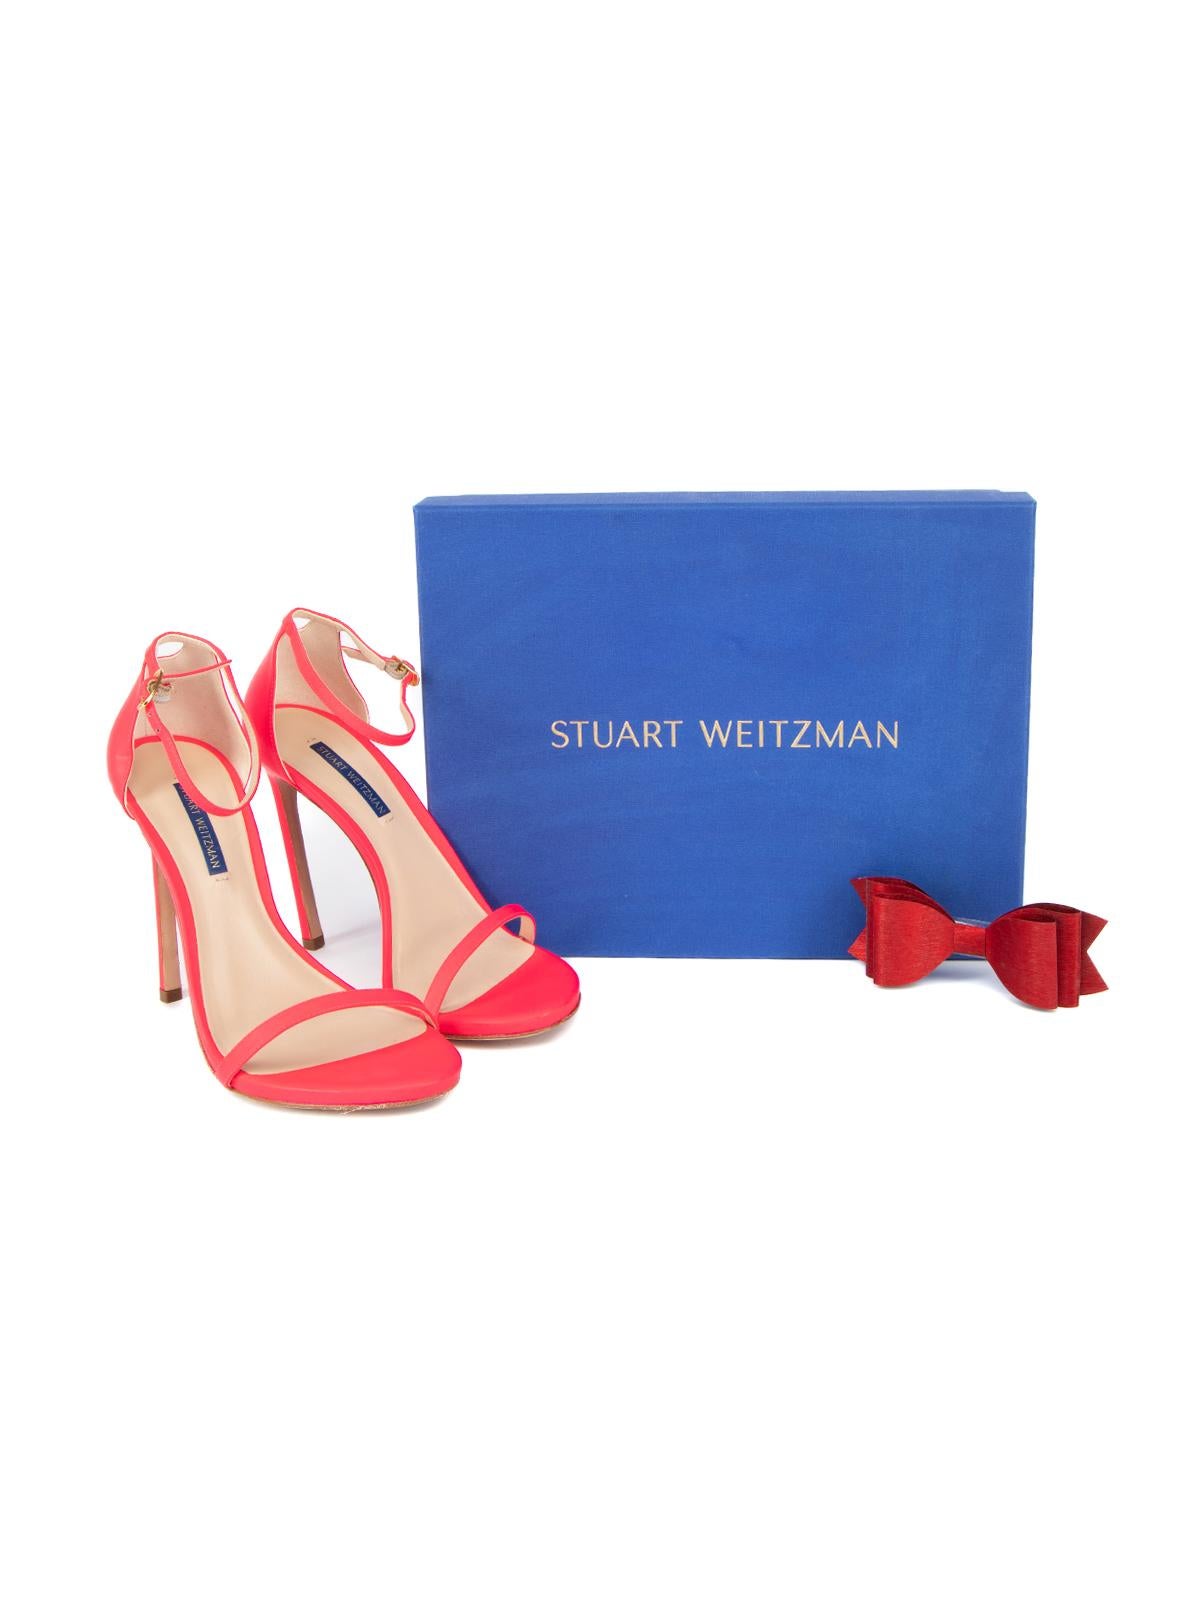 Stuart Weitzman Women's Neon Pink Barely There Ankle Strap Heels For Sale 4